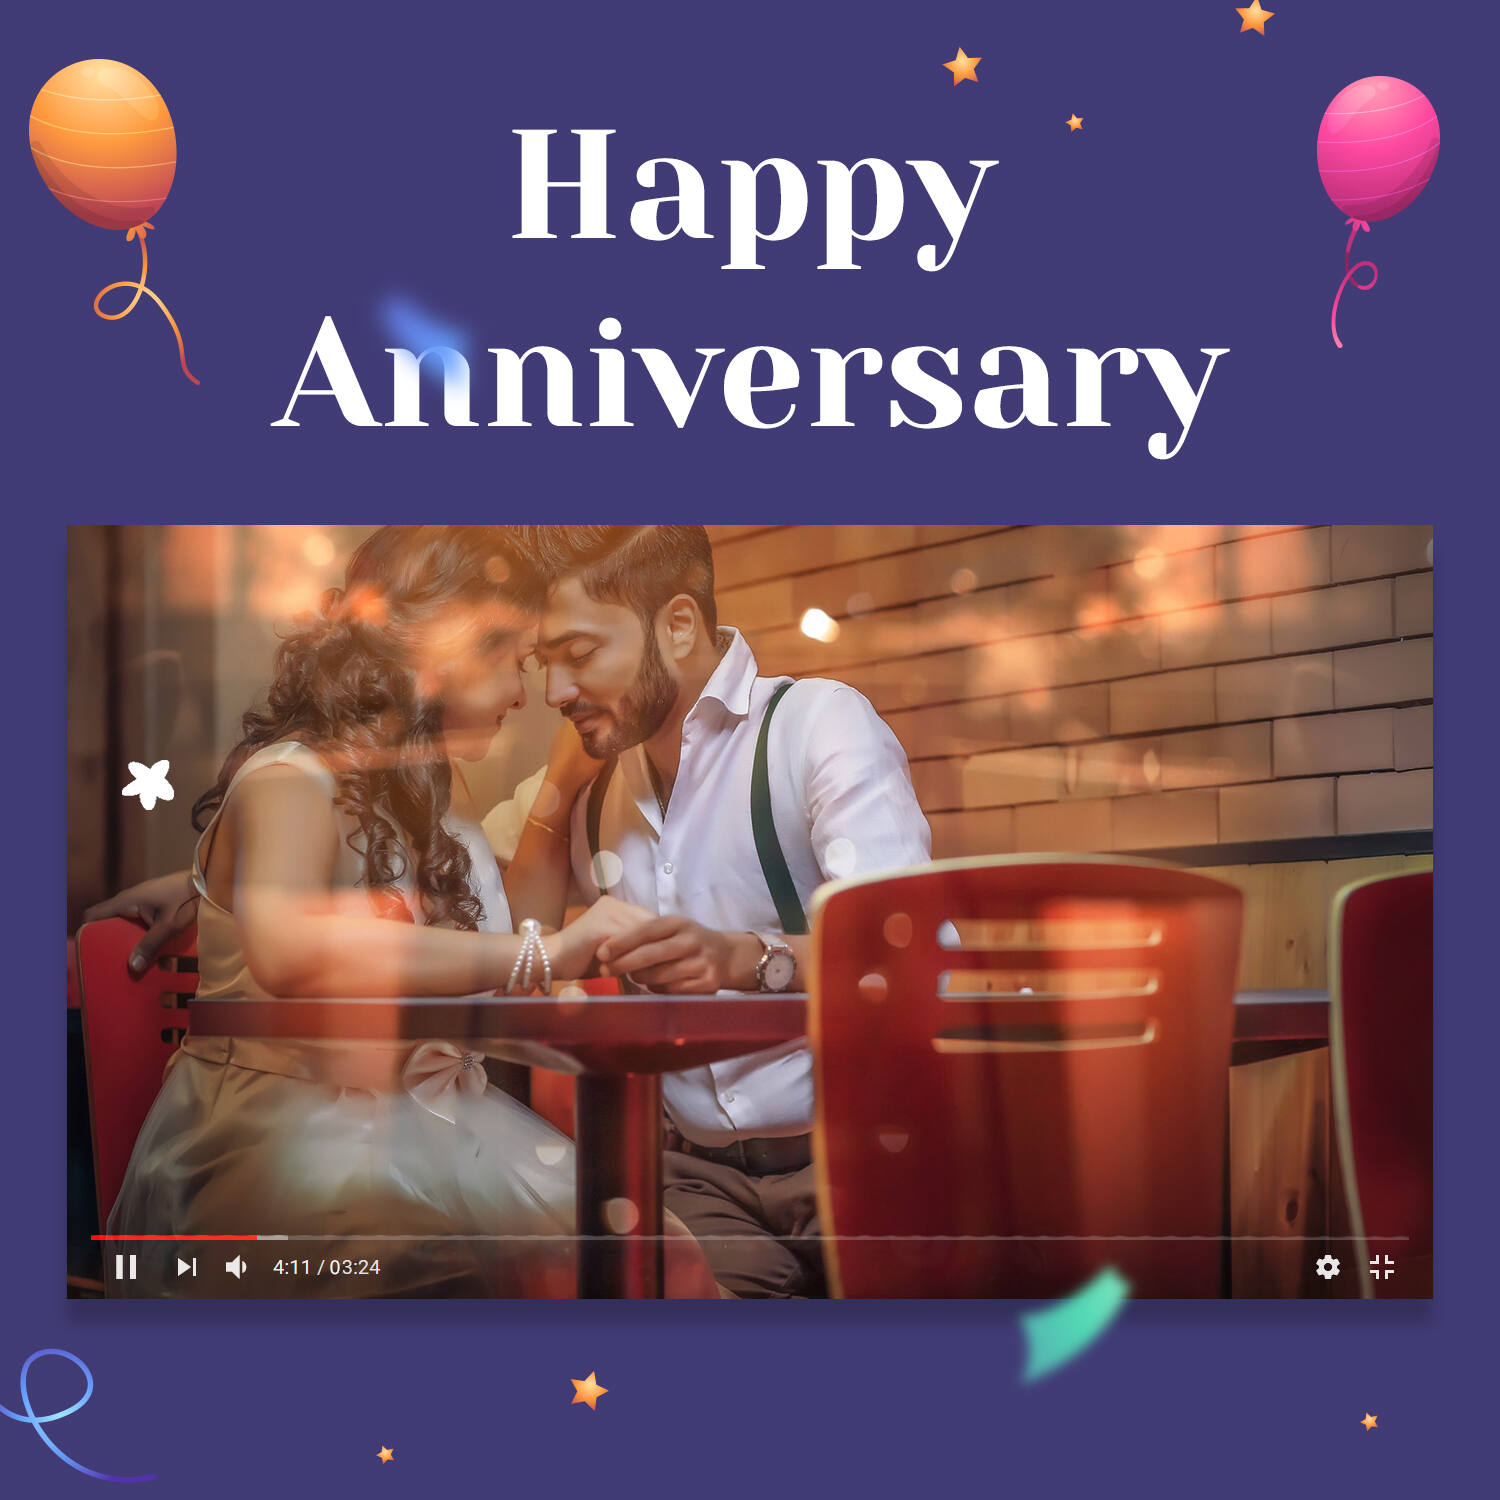 Happy Anniversary greeting card for celebrating wedding Anniversary - gift  for him or her [ 1 card with matching bag] : Amazon.in: Office Products